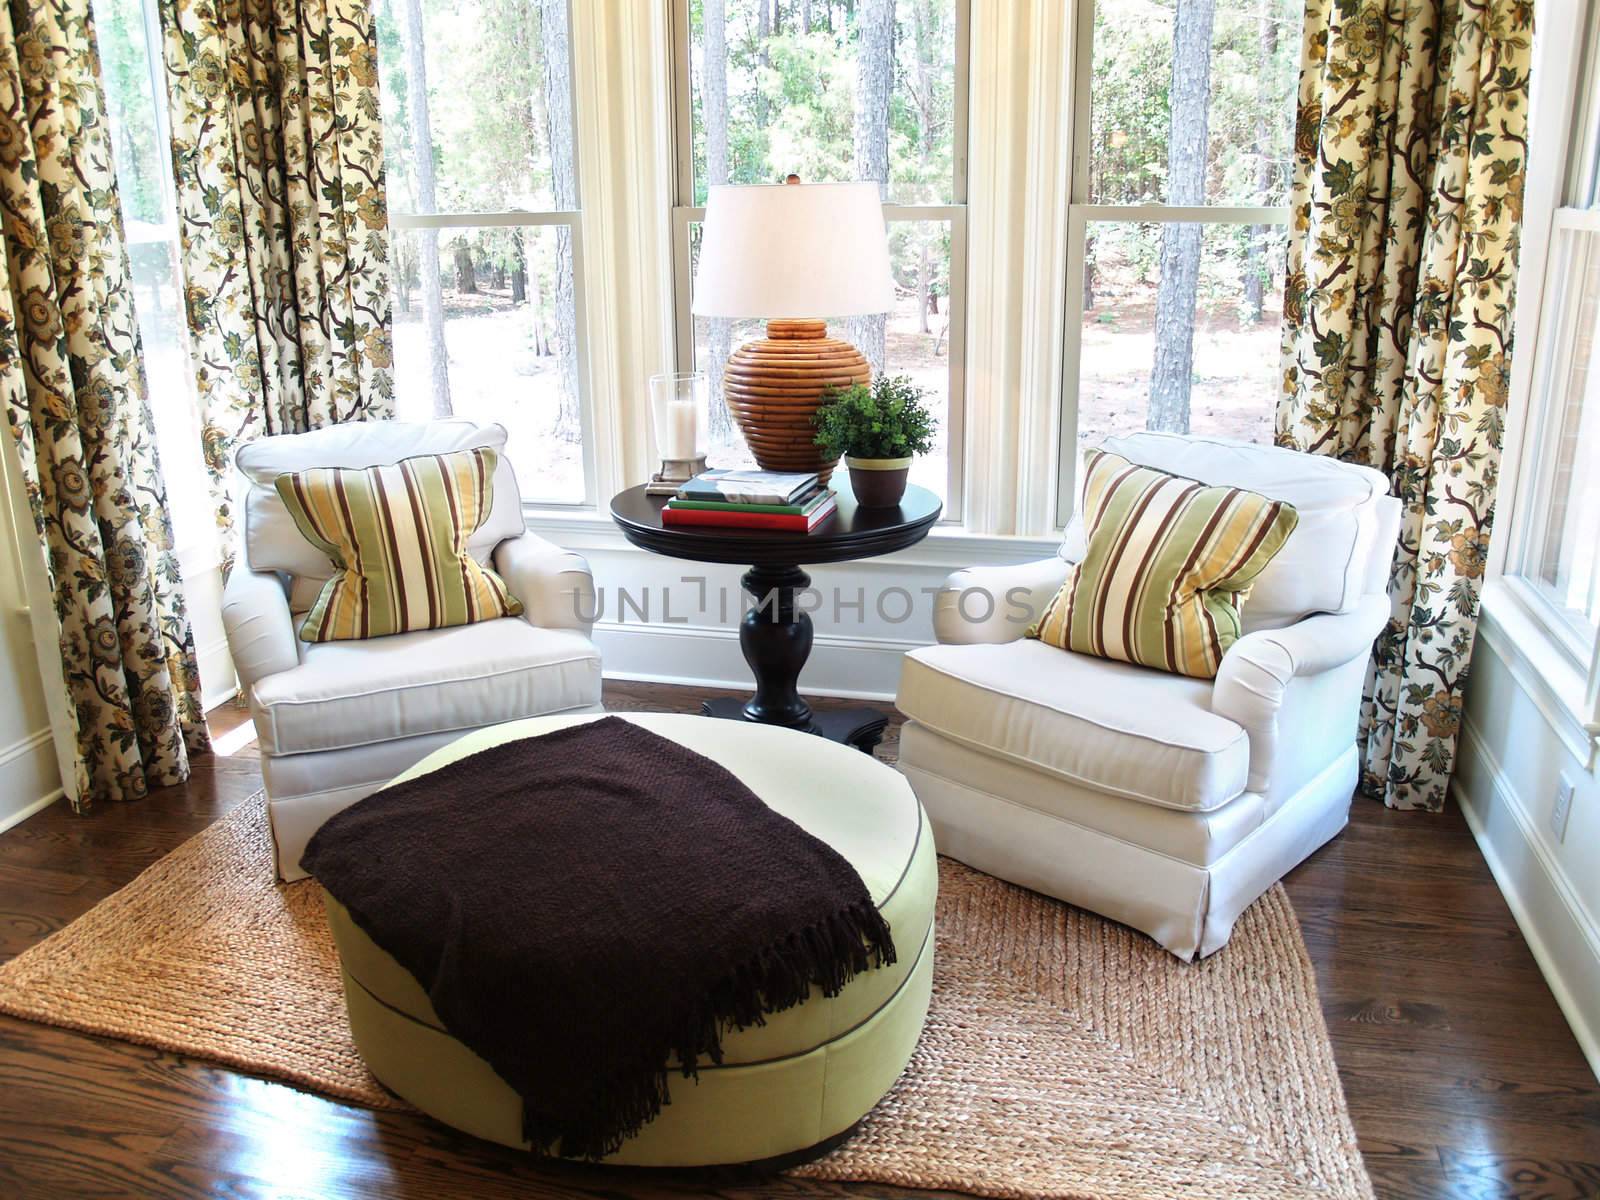 Two comfortable overstuffed chairs in a nicely decorated luxury sunroom